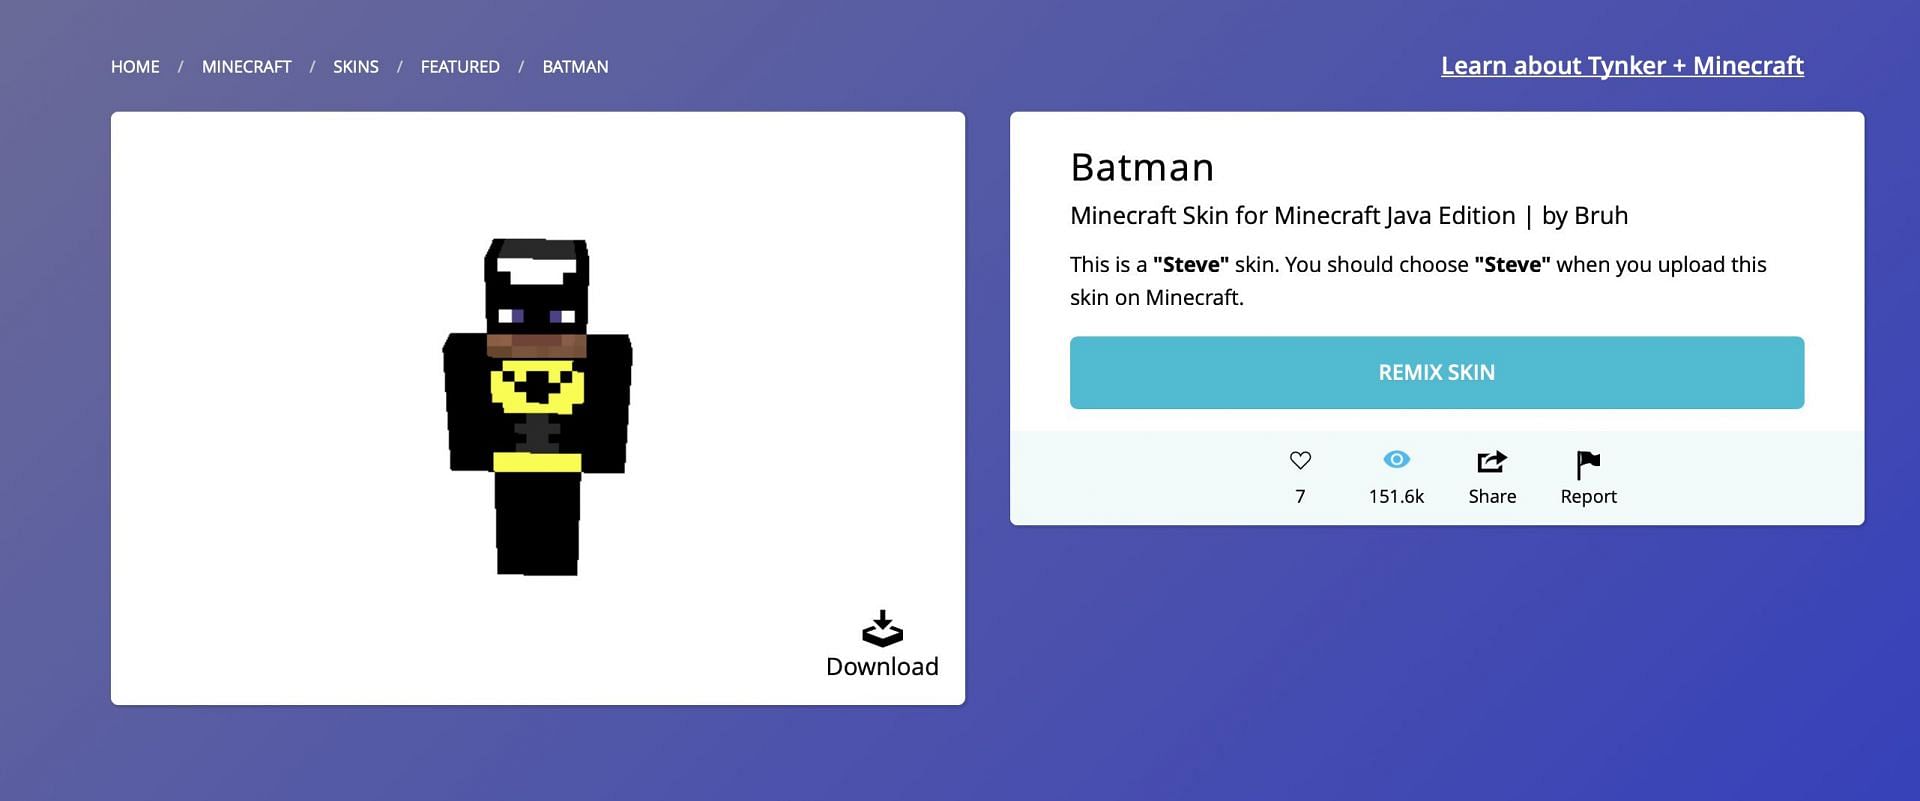 Batman is a great choice for players to deal out justice in their Minecraft worlds (Image via Tynker)